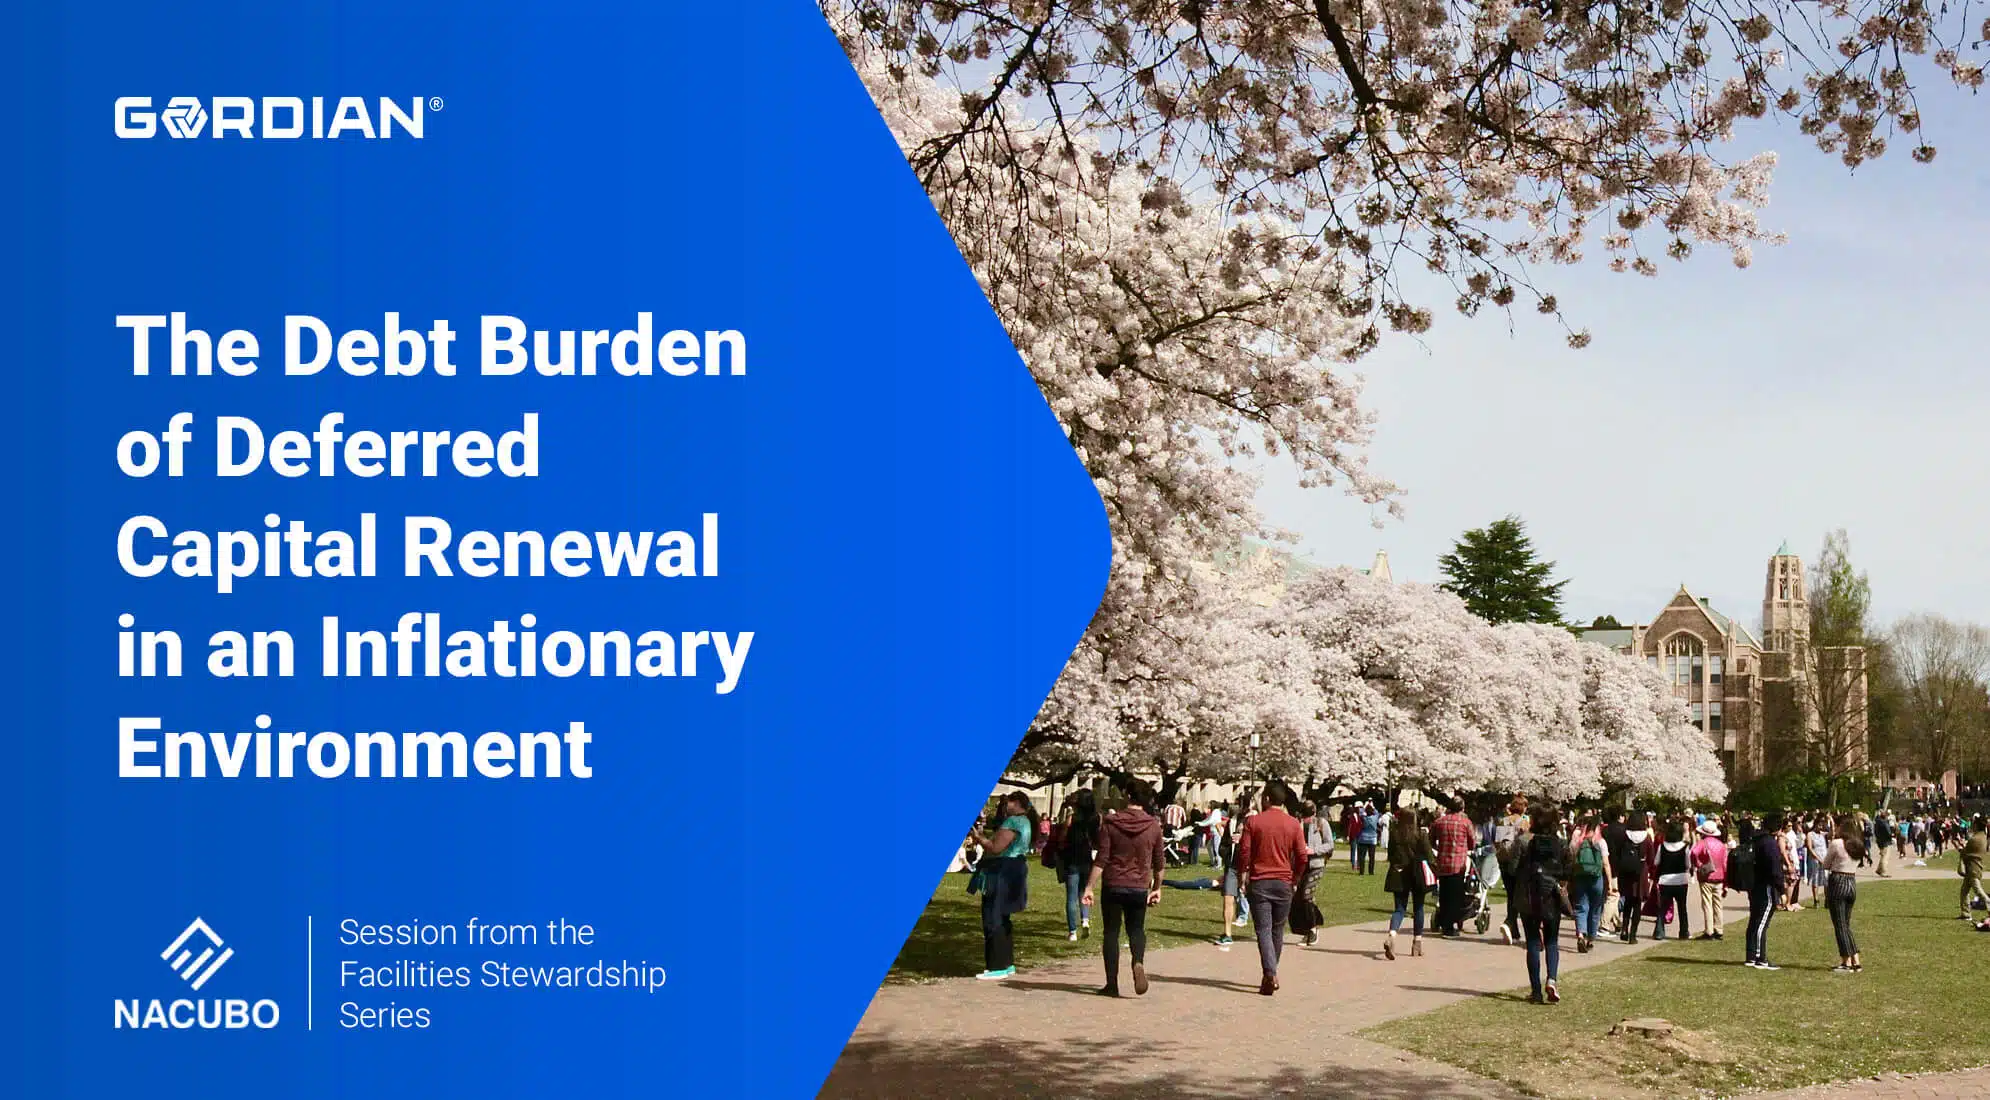 Facilities Stewardship Series: The Debt Burden of Deferred Capital Renewal in an Inflationary Environment 2